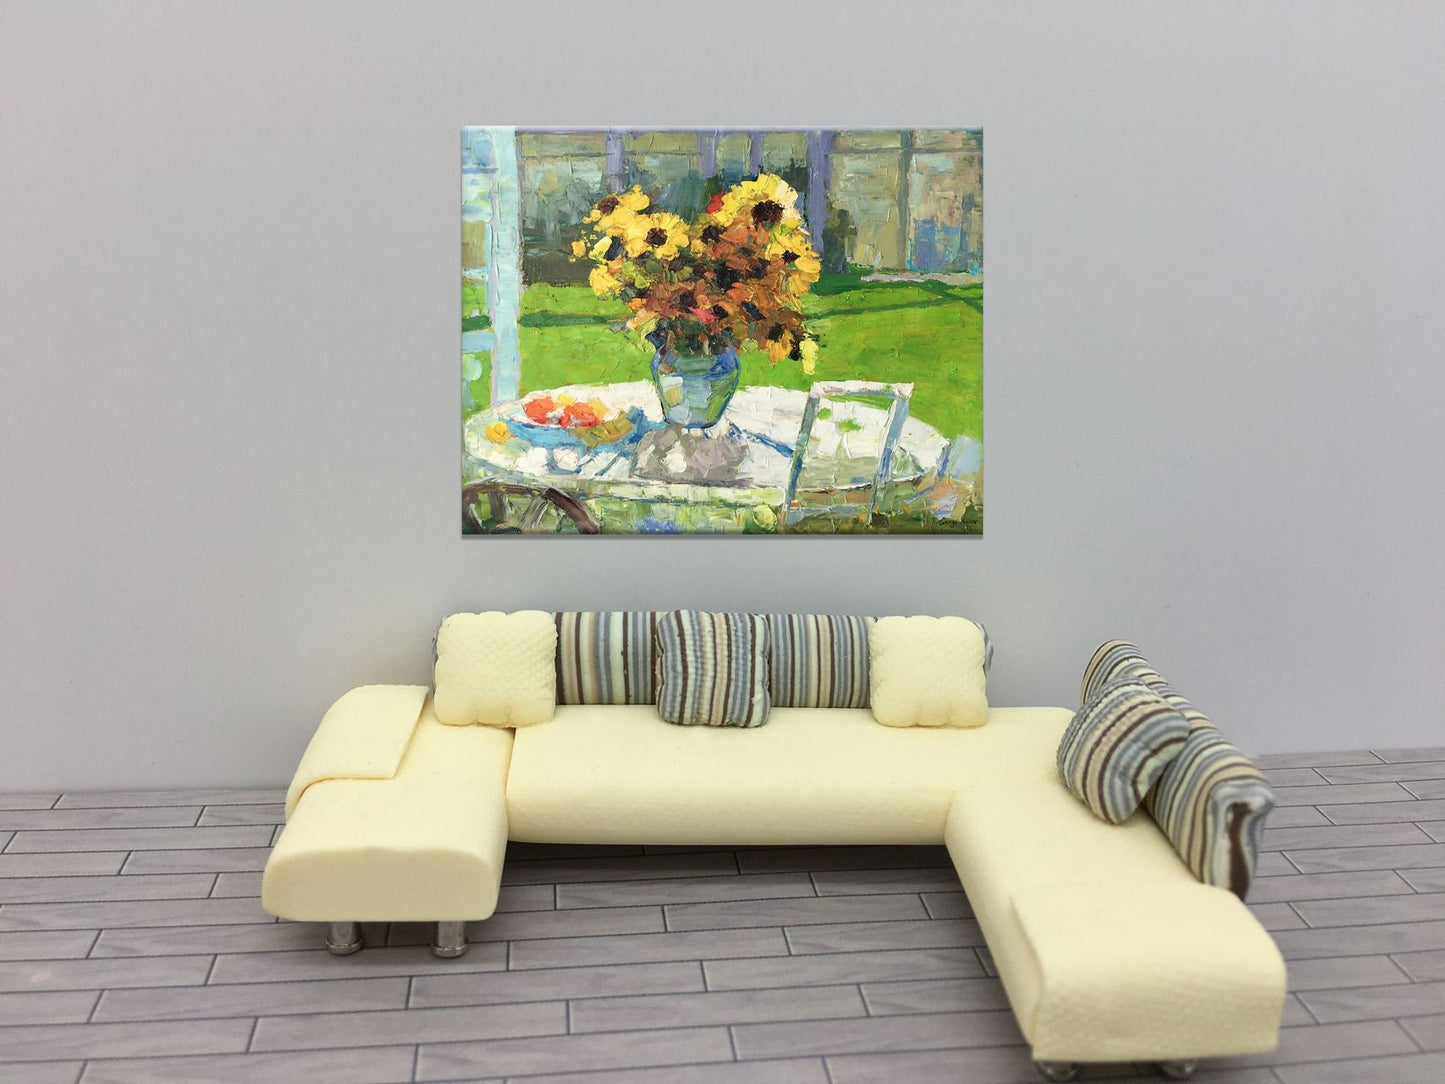 Flower Painting, Sunflowers Oil Painting, Original Art, Modern Art, Palette Knife Painting, Oil Painting, Abstract Flower Painting